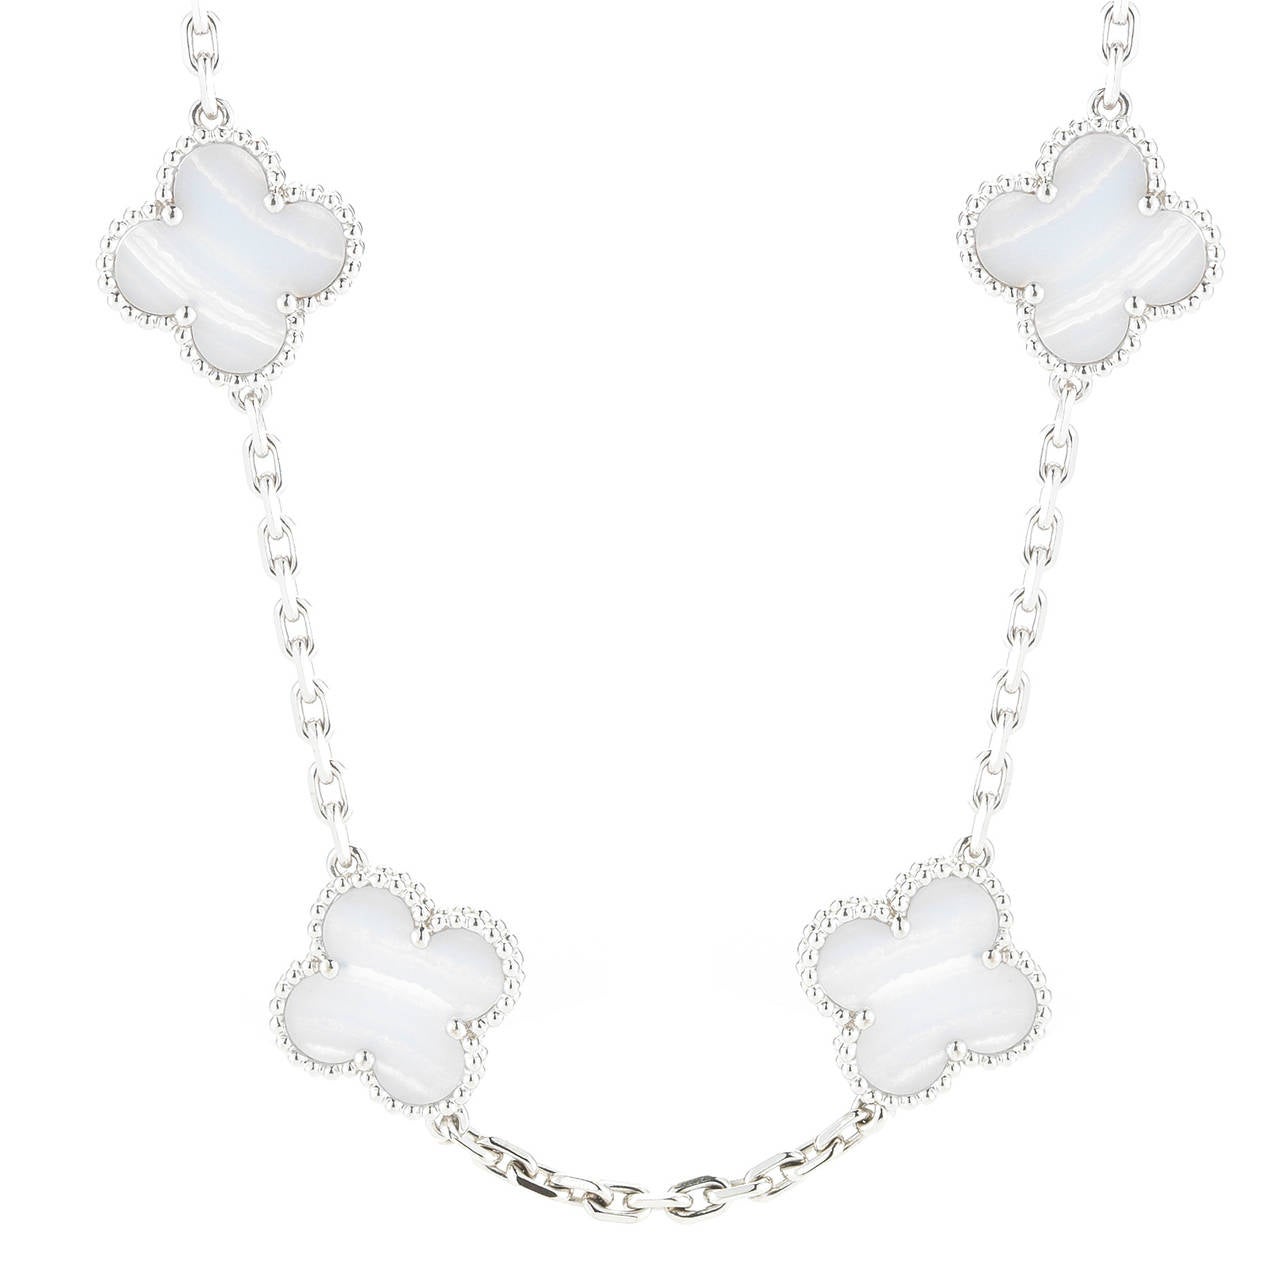 A stunning Van Cleef & Arpels necklace from the Alhambra collection. This necklace is 32